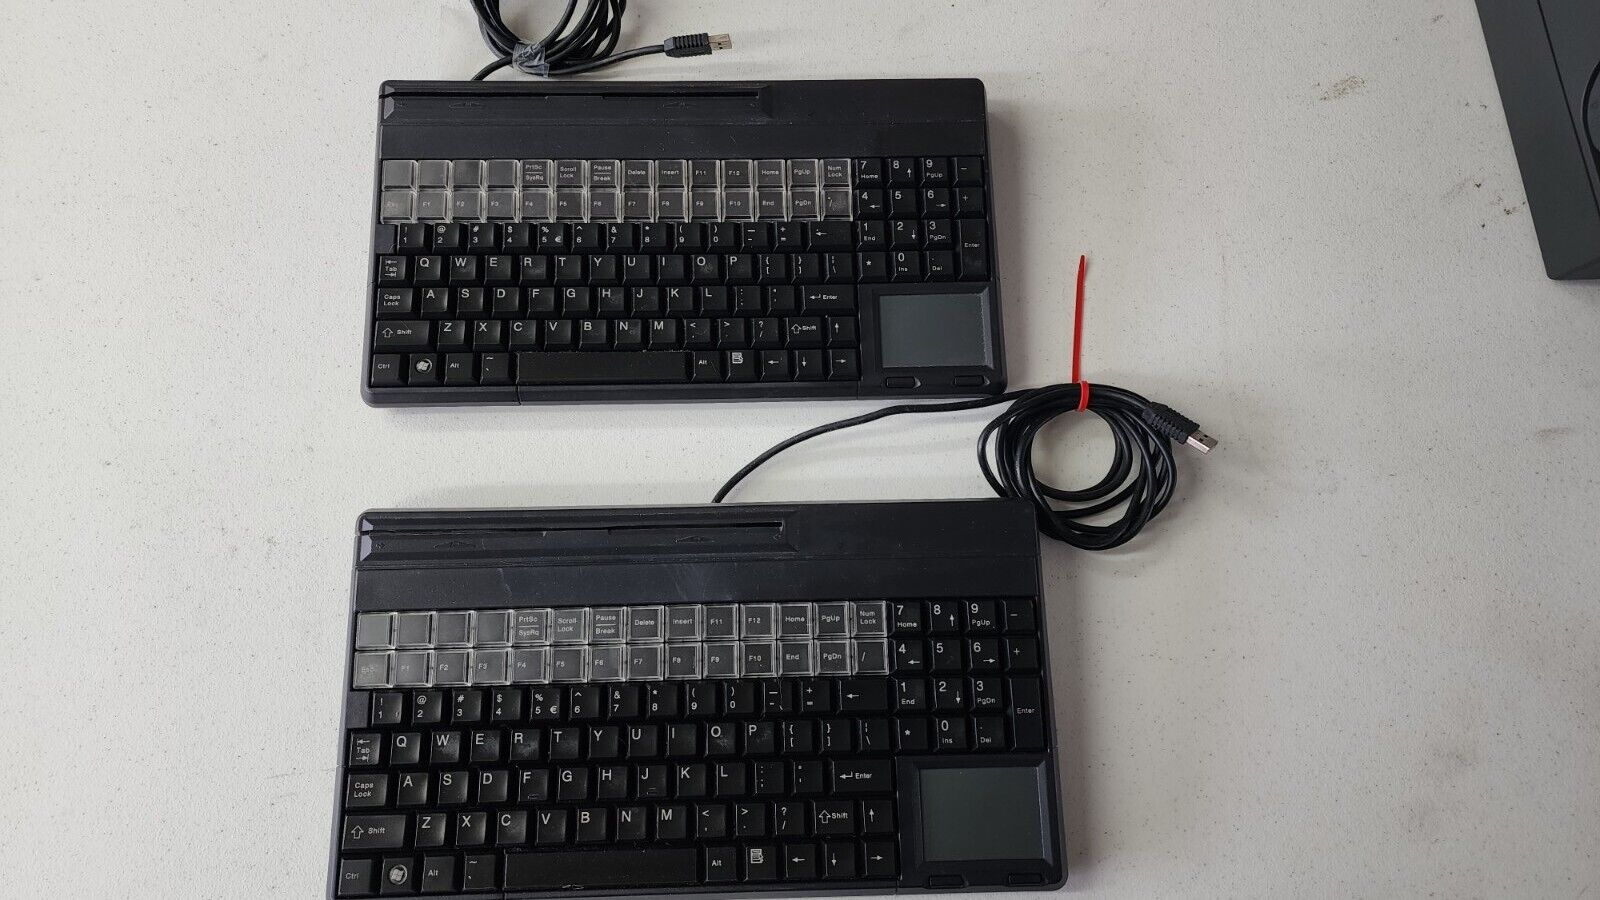 Lot of 2 CHERRY SPOS G86-61401 USB Black Keyboards w/ Touchpads TESTED